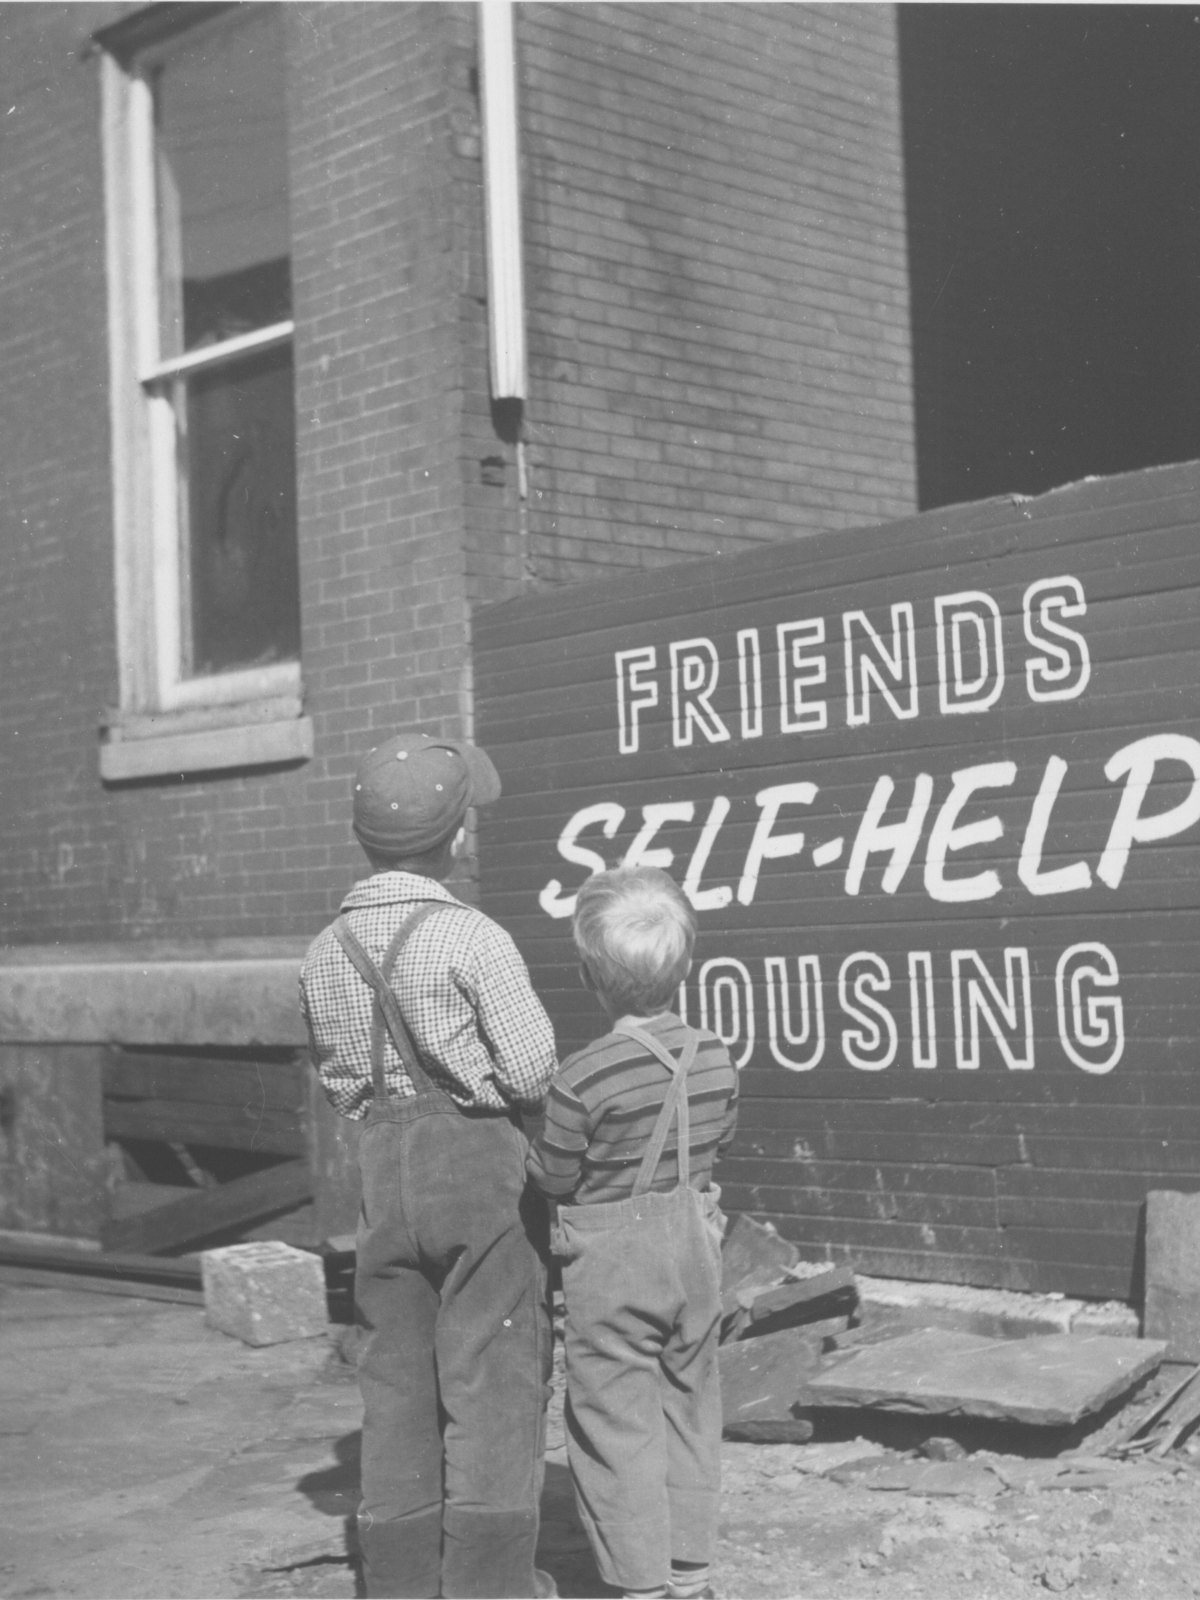 To Live Peaceably Together: The American Friends Service Committee’s Campaign for Open Housing, 1950-1970